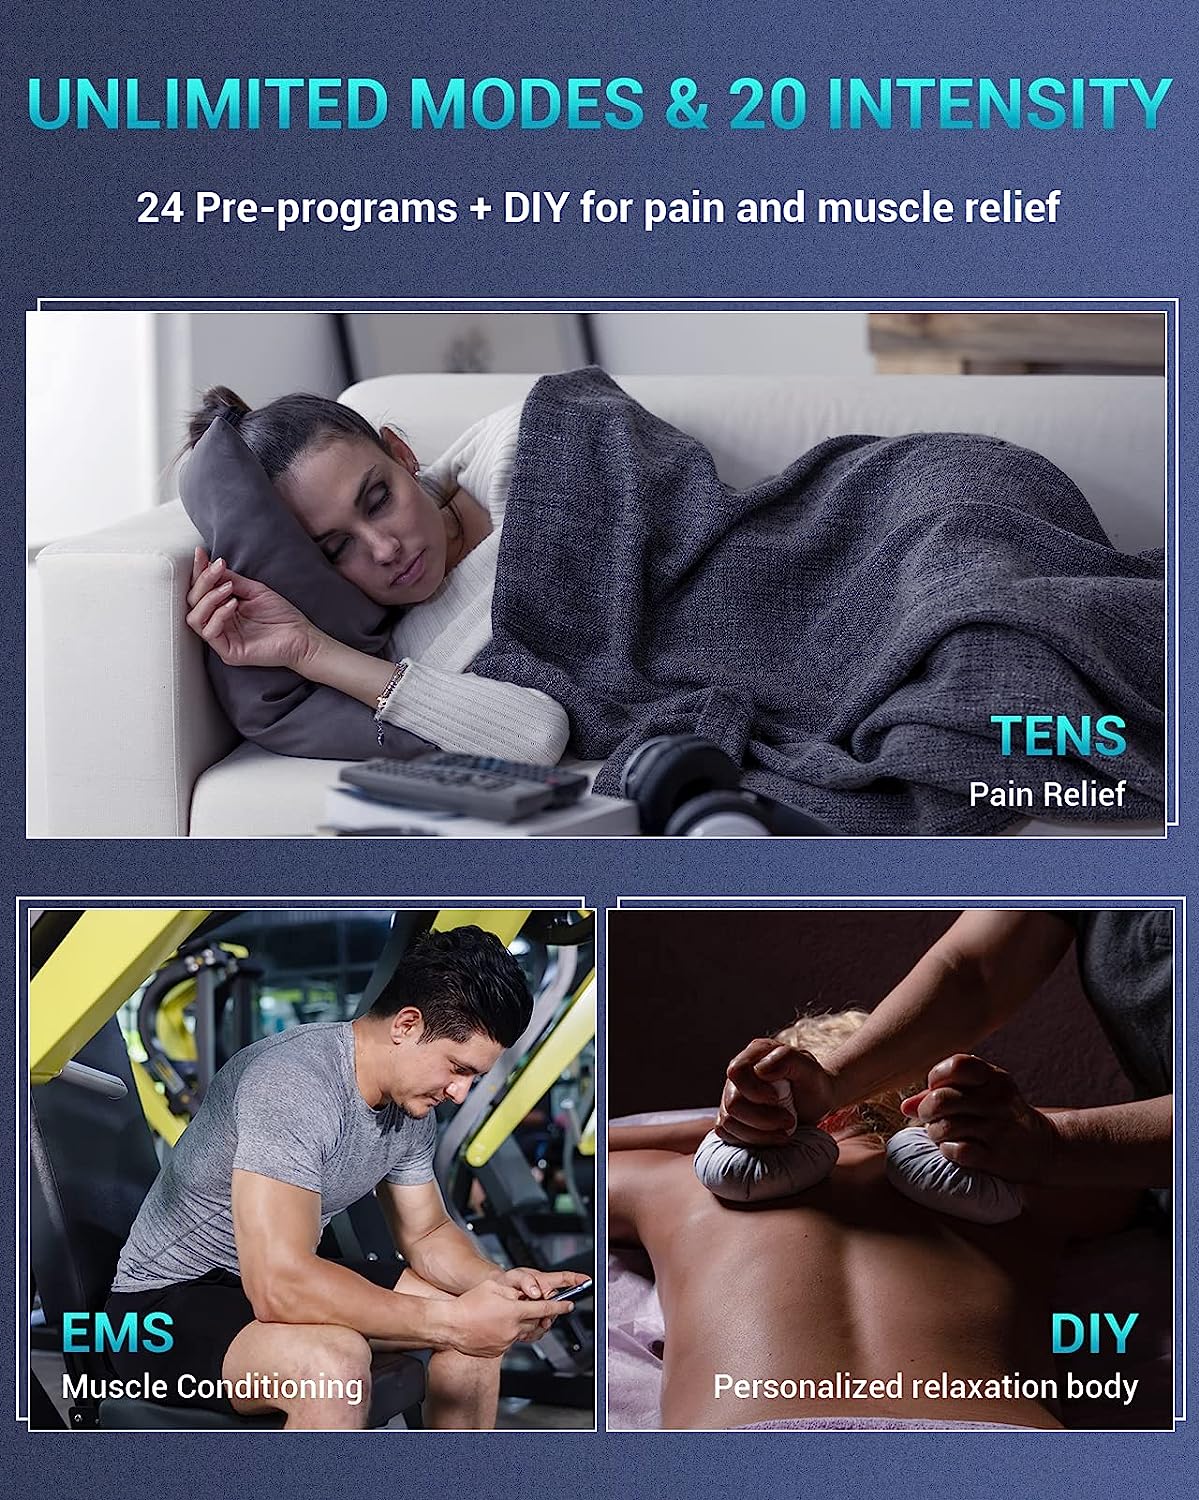 TENKER EMS TENS Unit Muscle Stimulator, 24 Modes Dual Channel Electronic  Pulse Massager for Pain Relief/Management & Muscle Strength Rechargeable  TENS